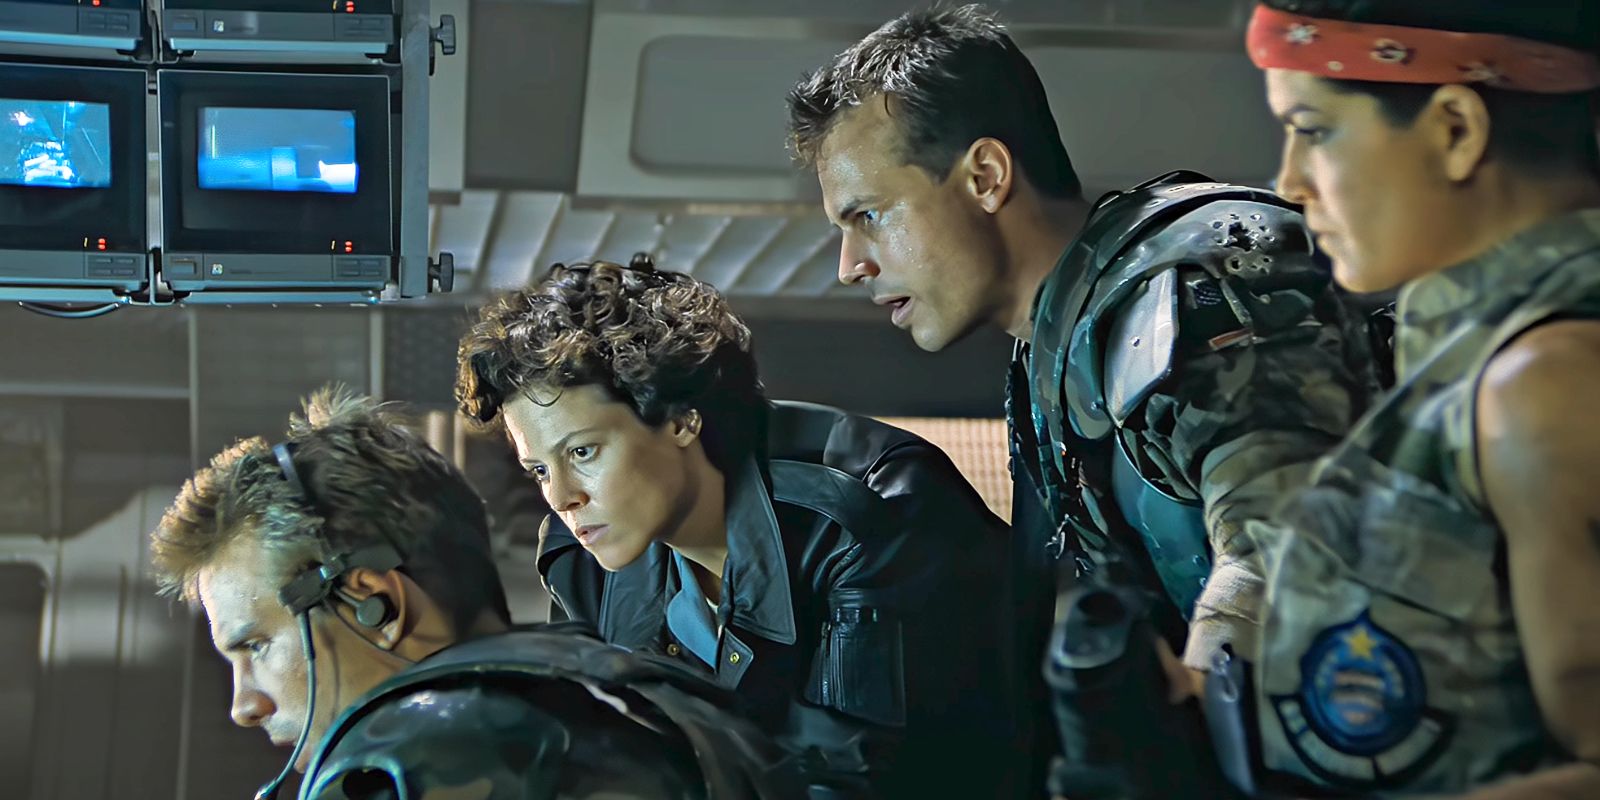 Ripley and crew looking down at screen in Aliens cut scene